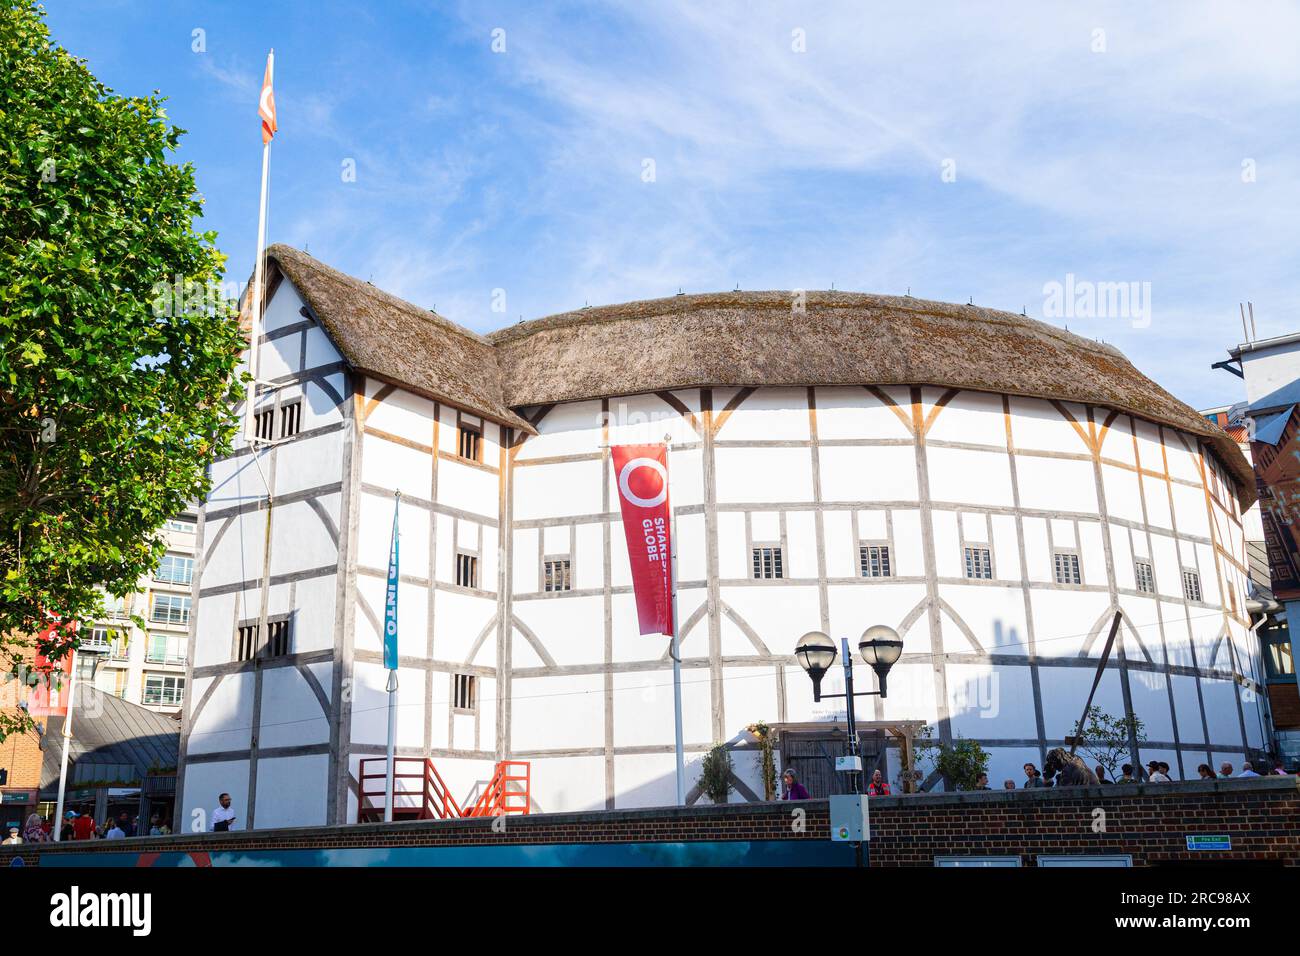 LONDON, UK - 6TH JULY 2023: Part of the Shakespeare's Globe theatre in central London. People can be seen. Stock Photo